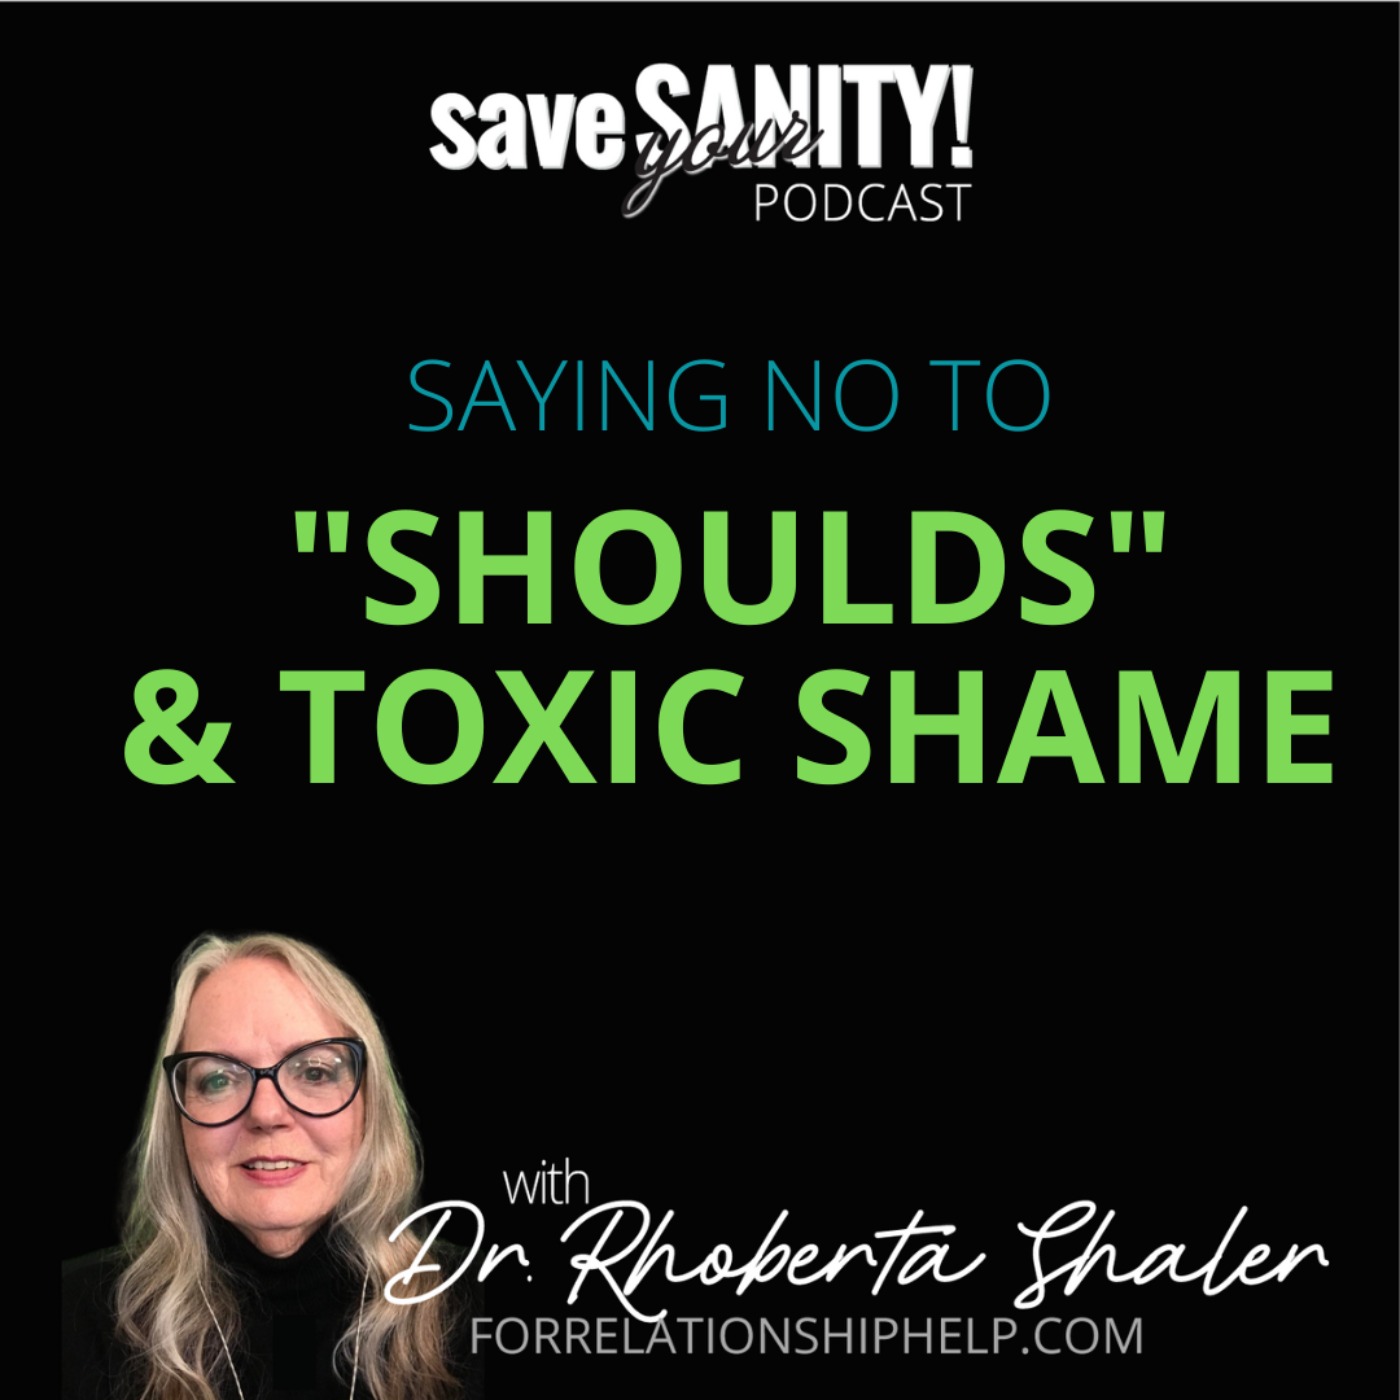 Saying No to "Shoulds" & Toxic Shame